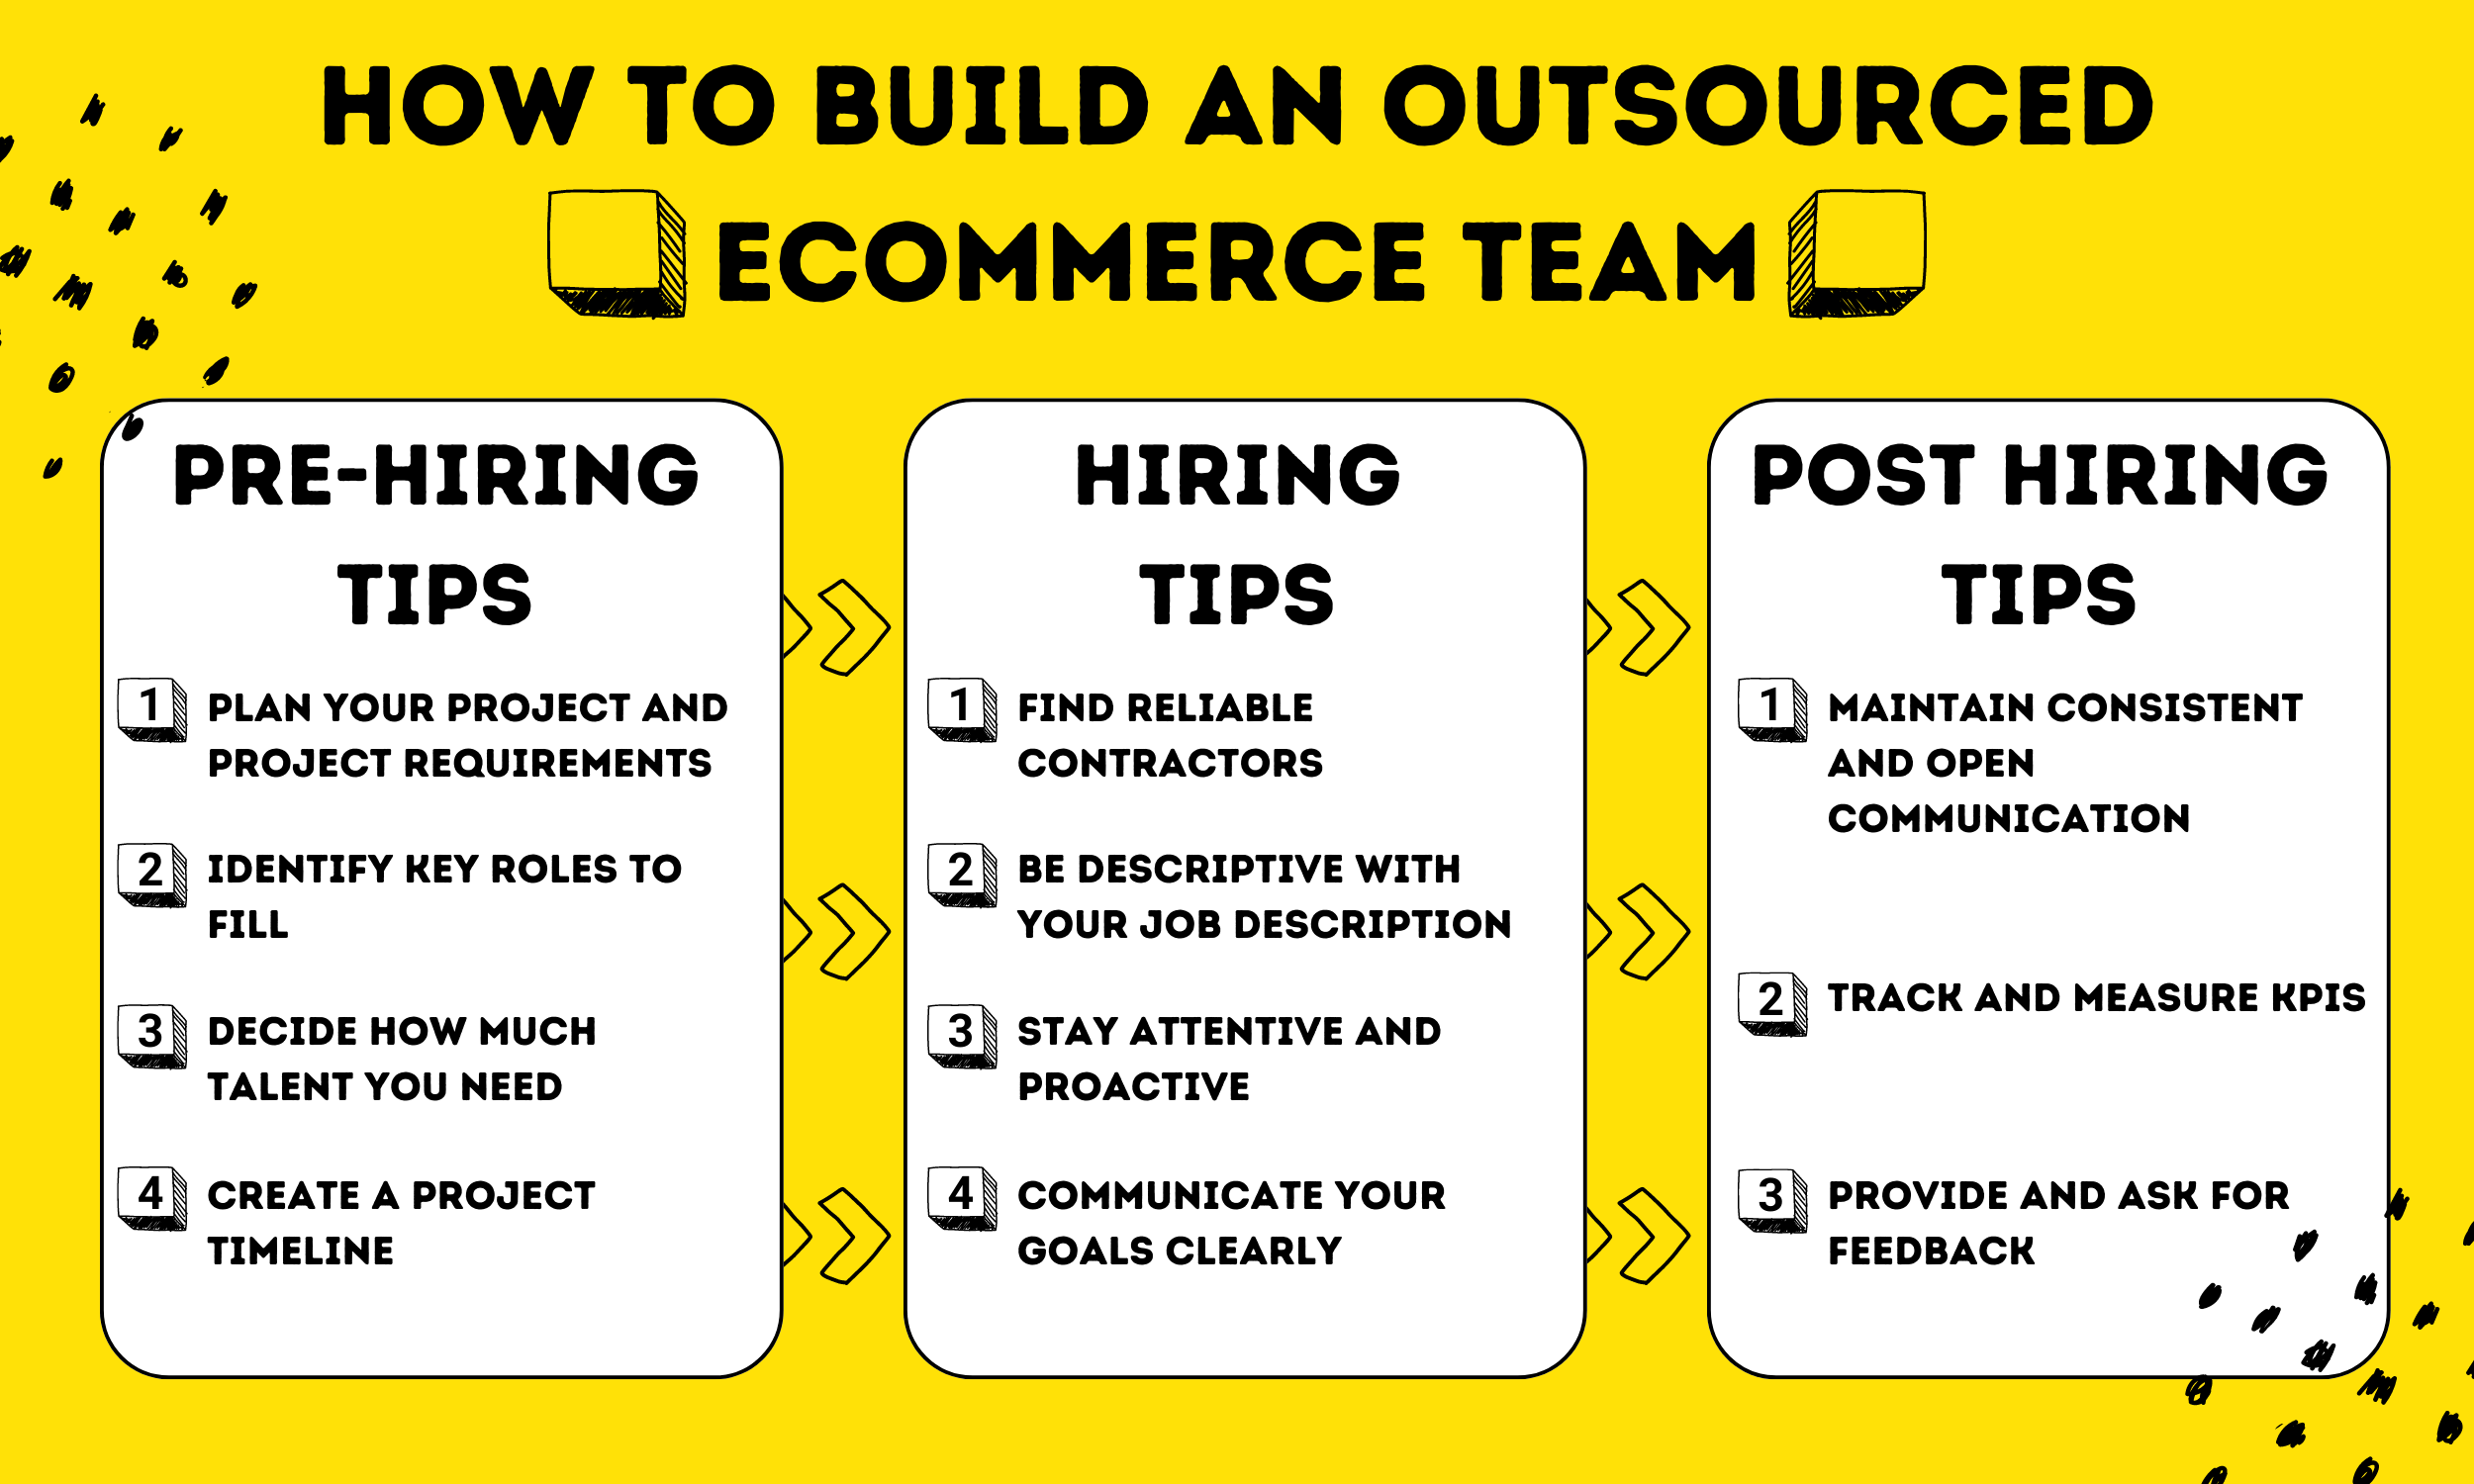 Building an Outsourced Ecommerce Team